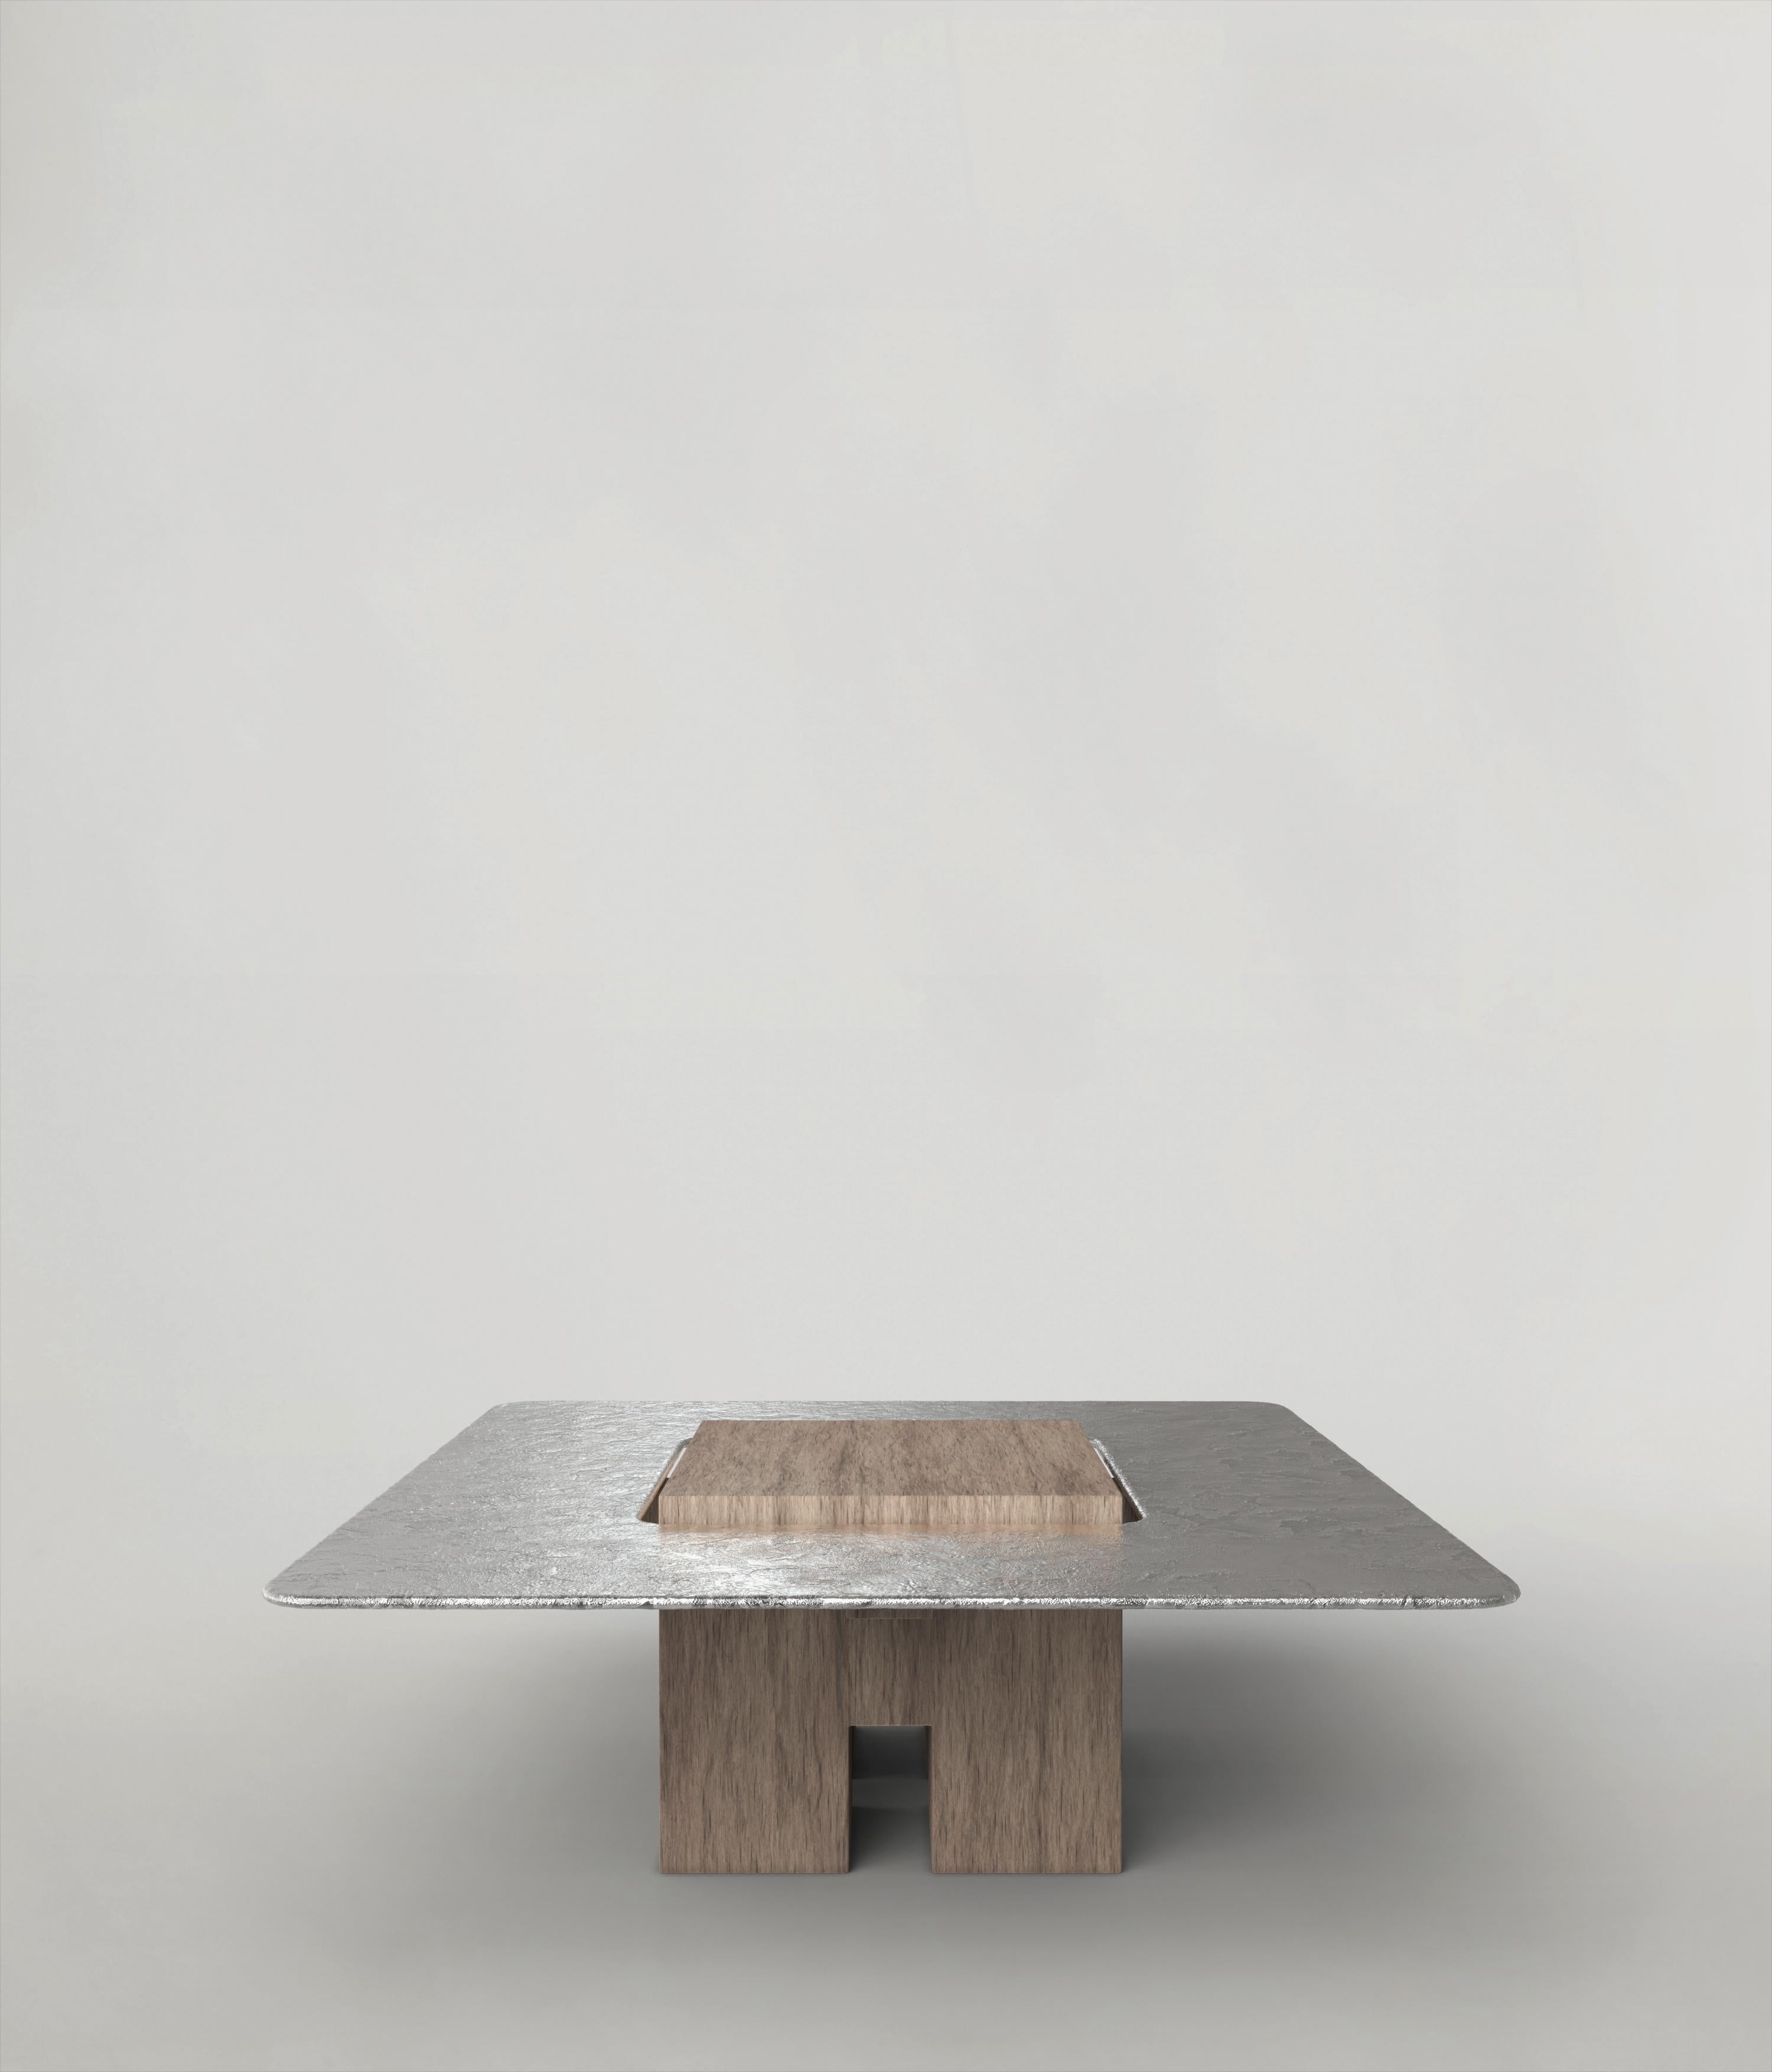 Tempio V2 Low Table by Edizione Limitata
Limited Edition of 150 pieces. Signed and numbered.
Dimensions: D92 x W92 x H32 cm
Materials: Solid Ash Wood+Aluminum

Tempio is a collection of contemporary sculptural table made by Italian artisans in